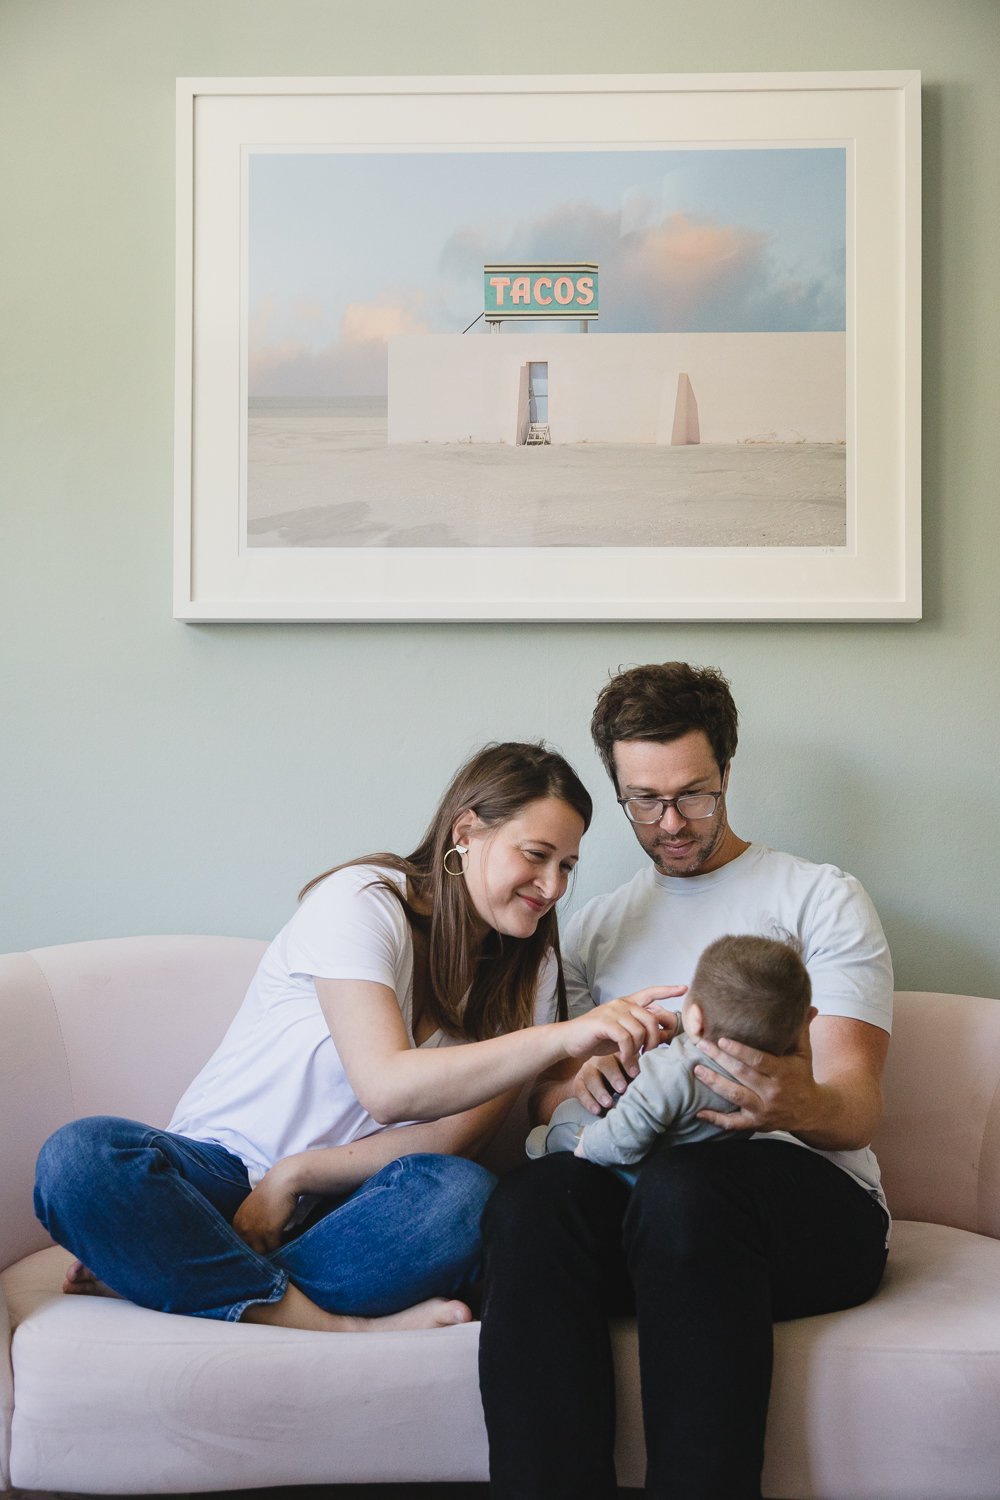 newborn lifestyle session at home in San Francisco by Allison Bu